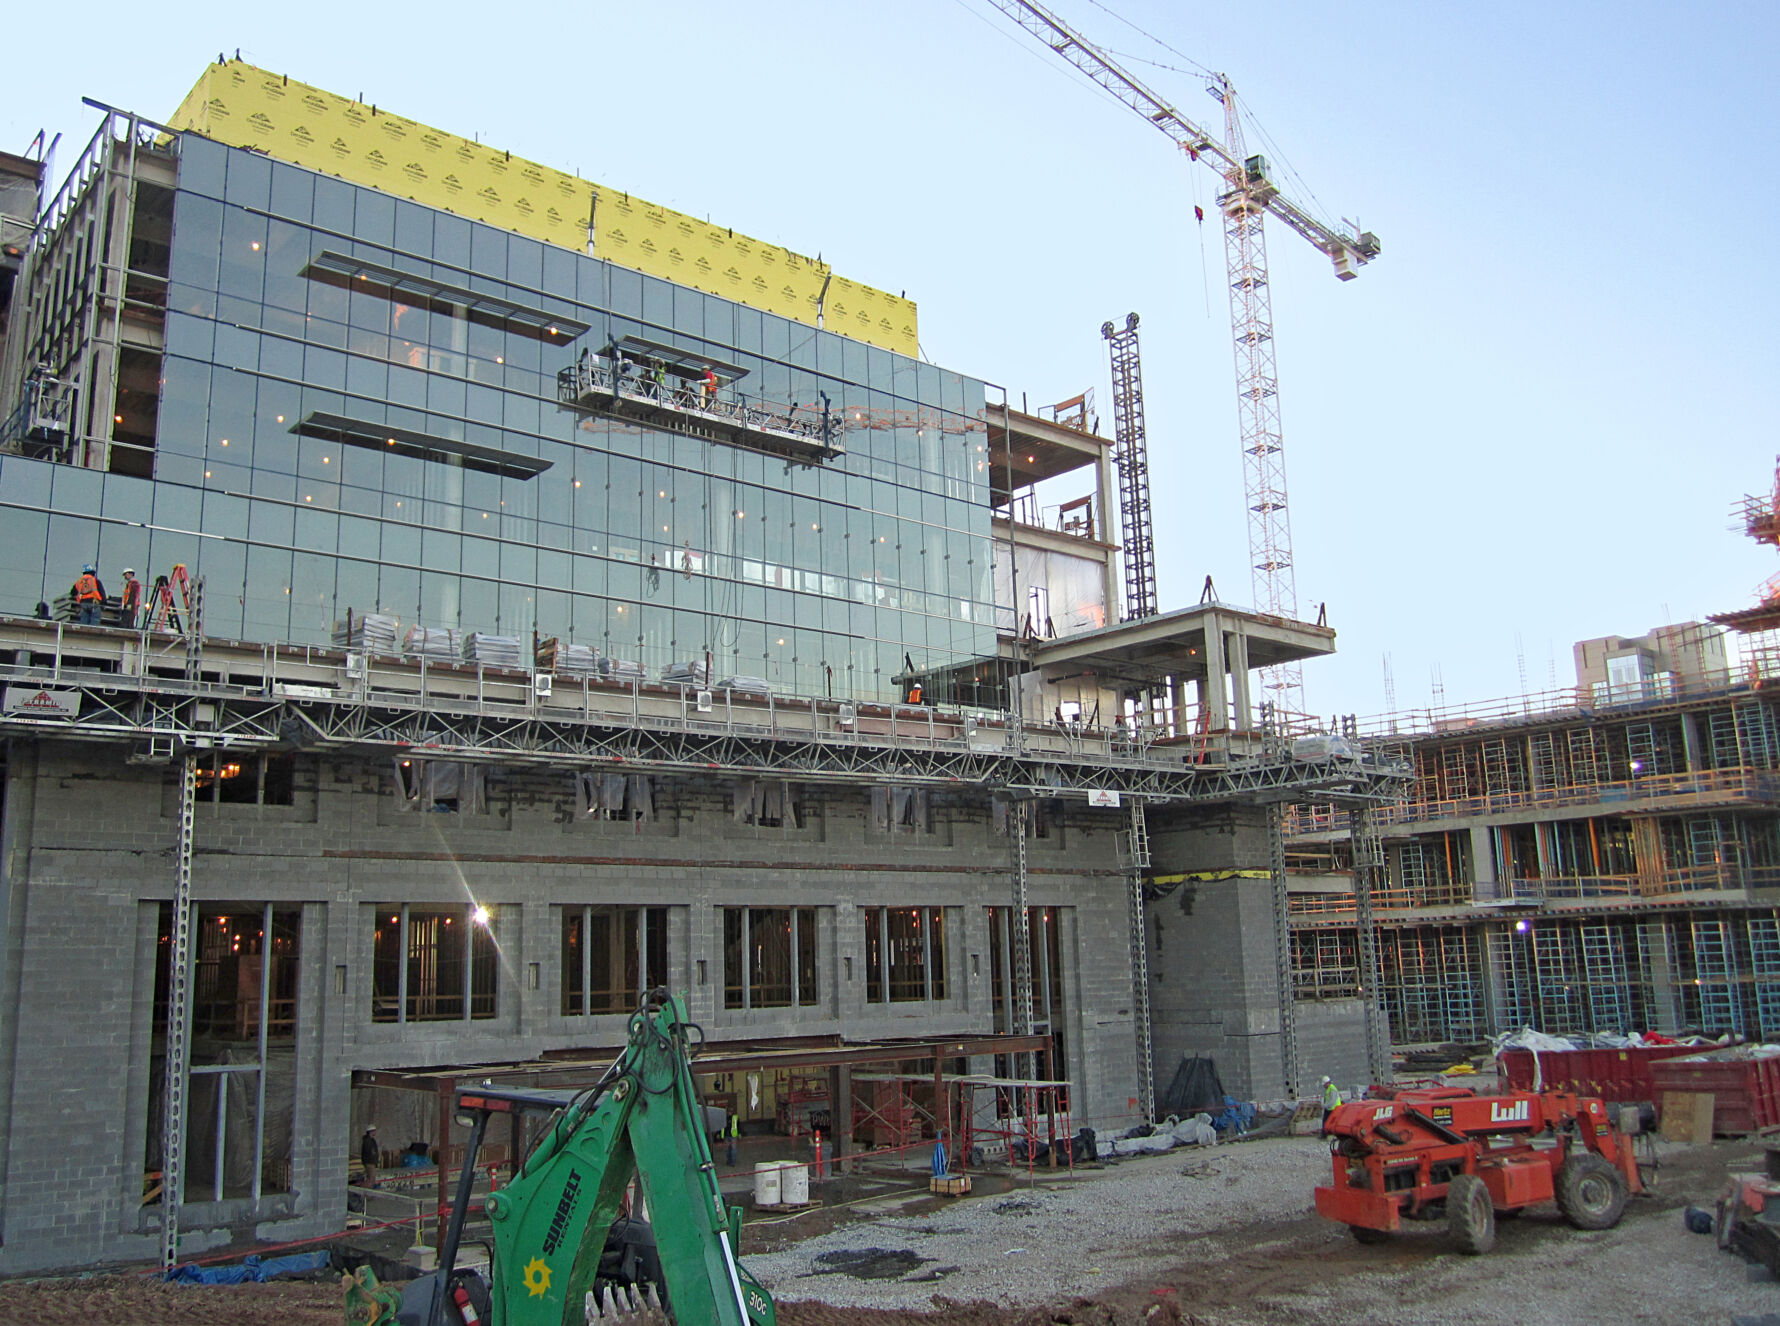 Duke Cancer Center in Durham, NC featuring Johnson Concrete Products Gray Block